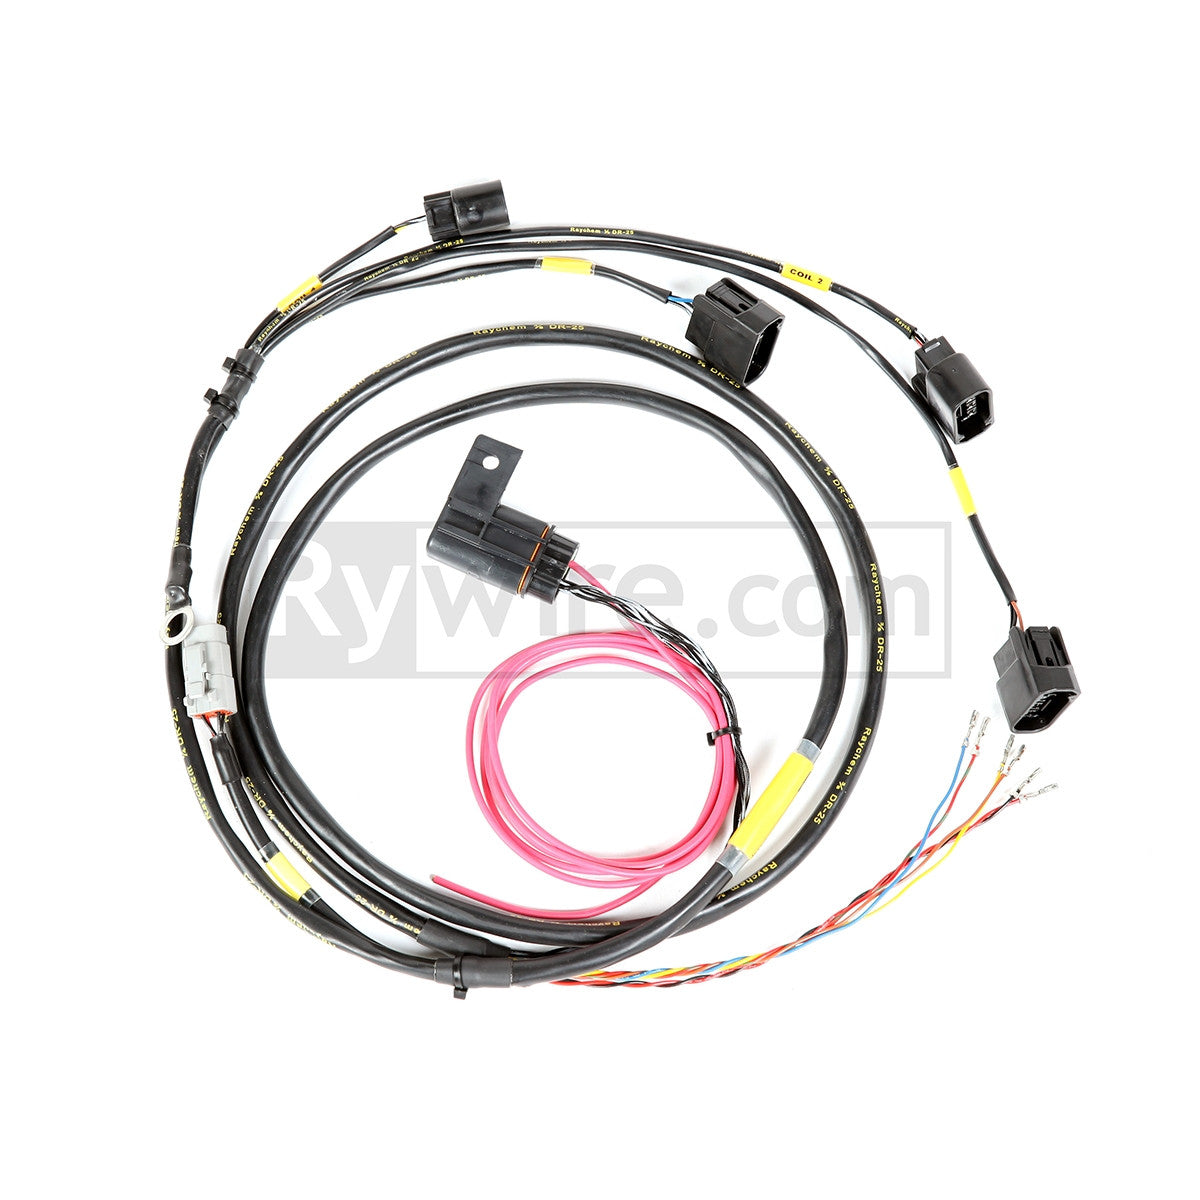 Rywire Coil-On-Plug Harness